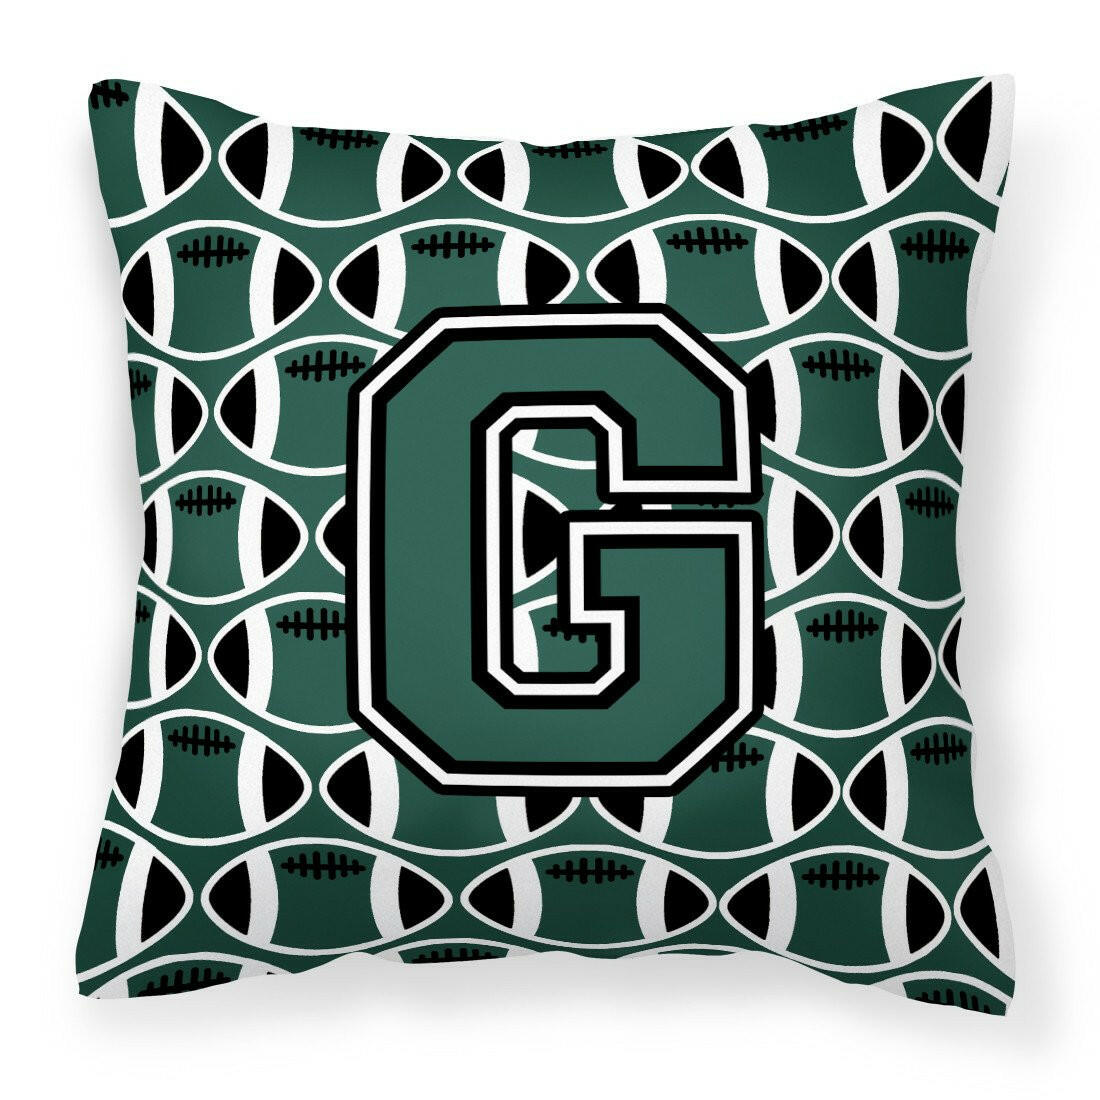 Letter G Football Green and White Fabric Decorative Pillow CJ1071-GPW1414 by Caroline's Treasures